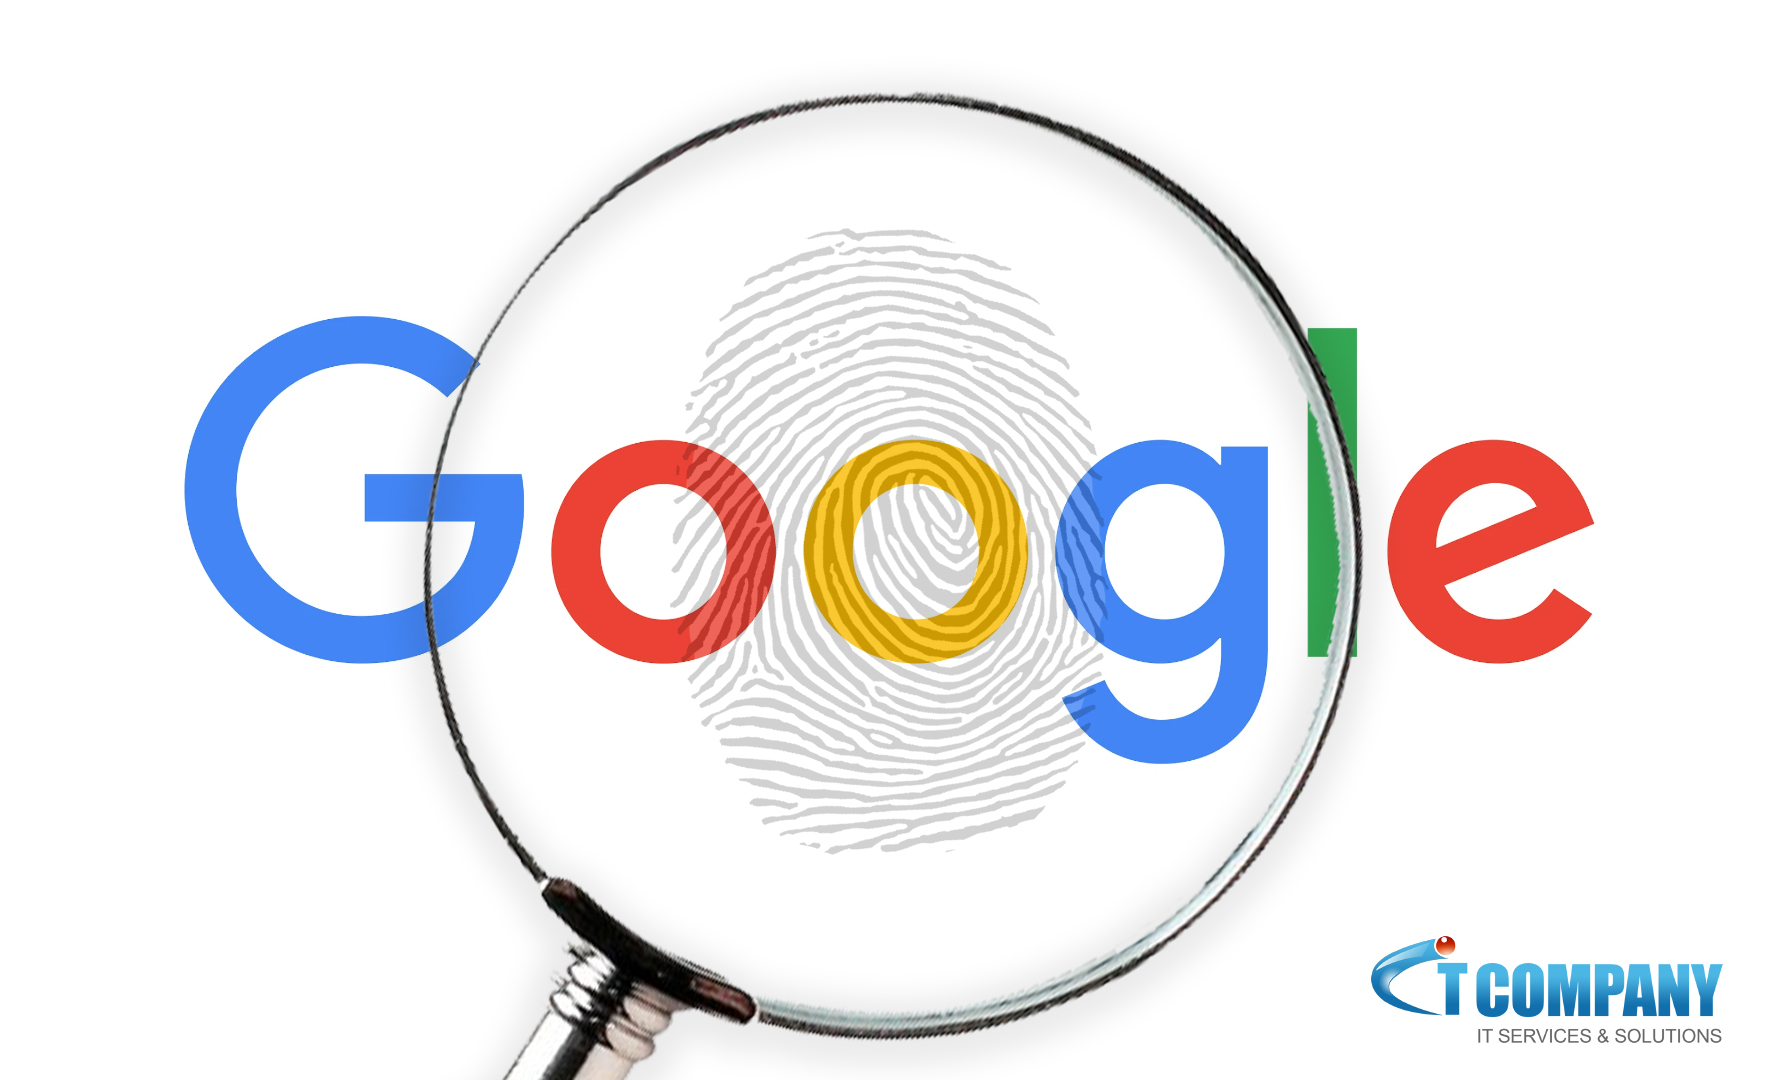 Google was sued for illegally gathering biometric data